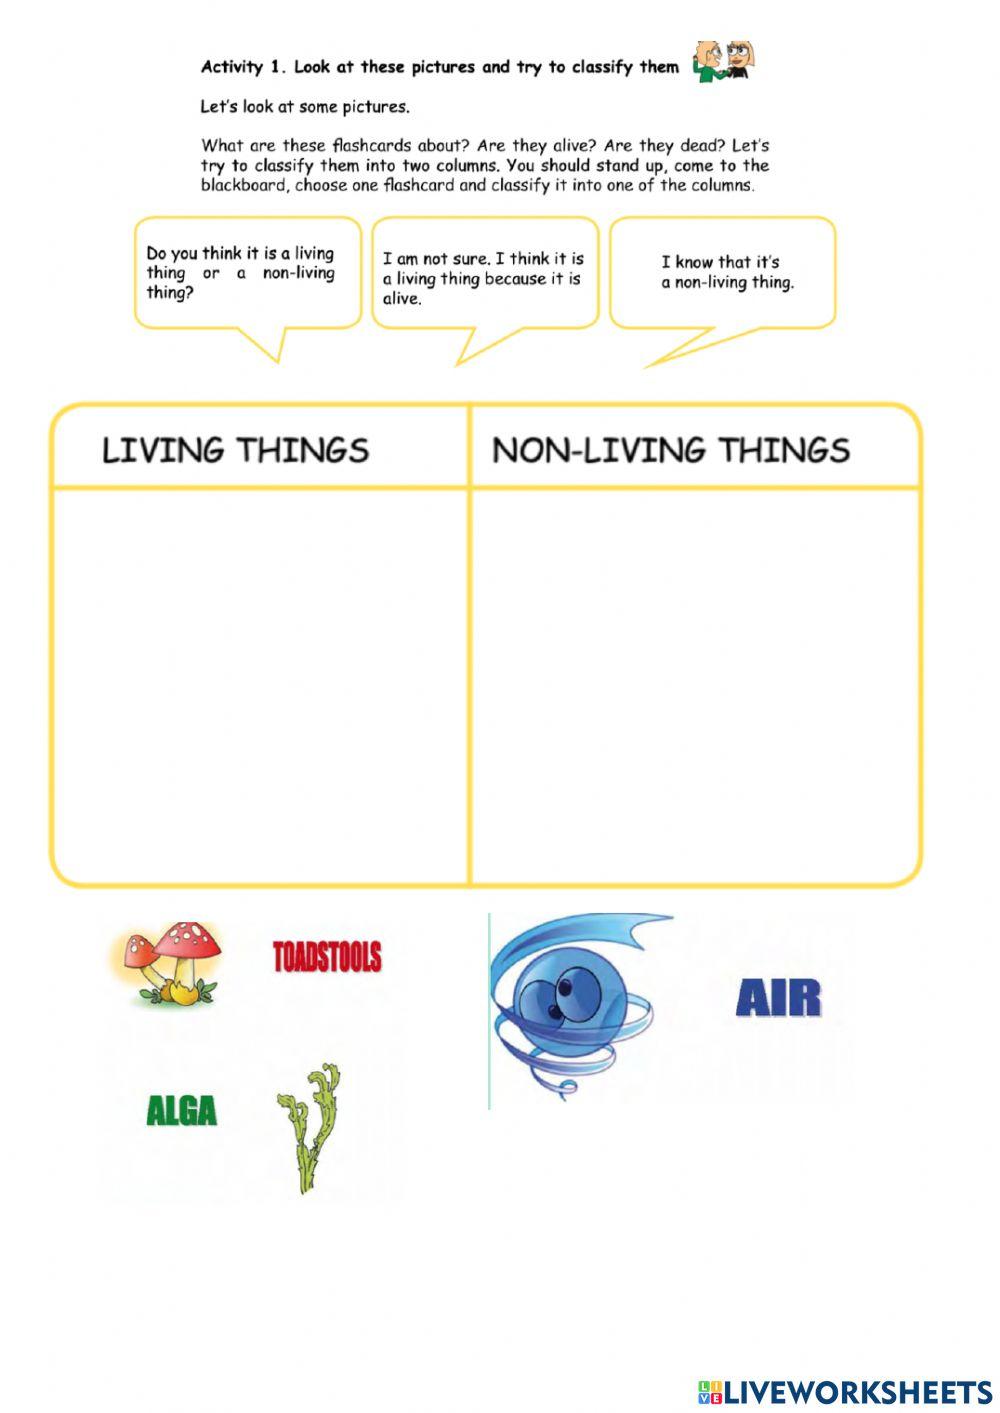 Living things and non-living things